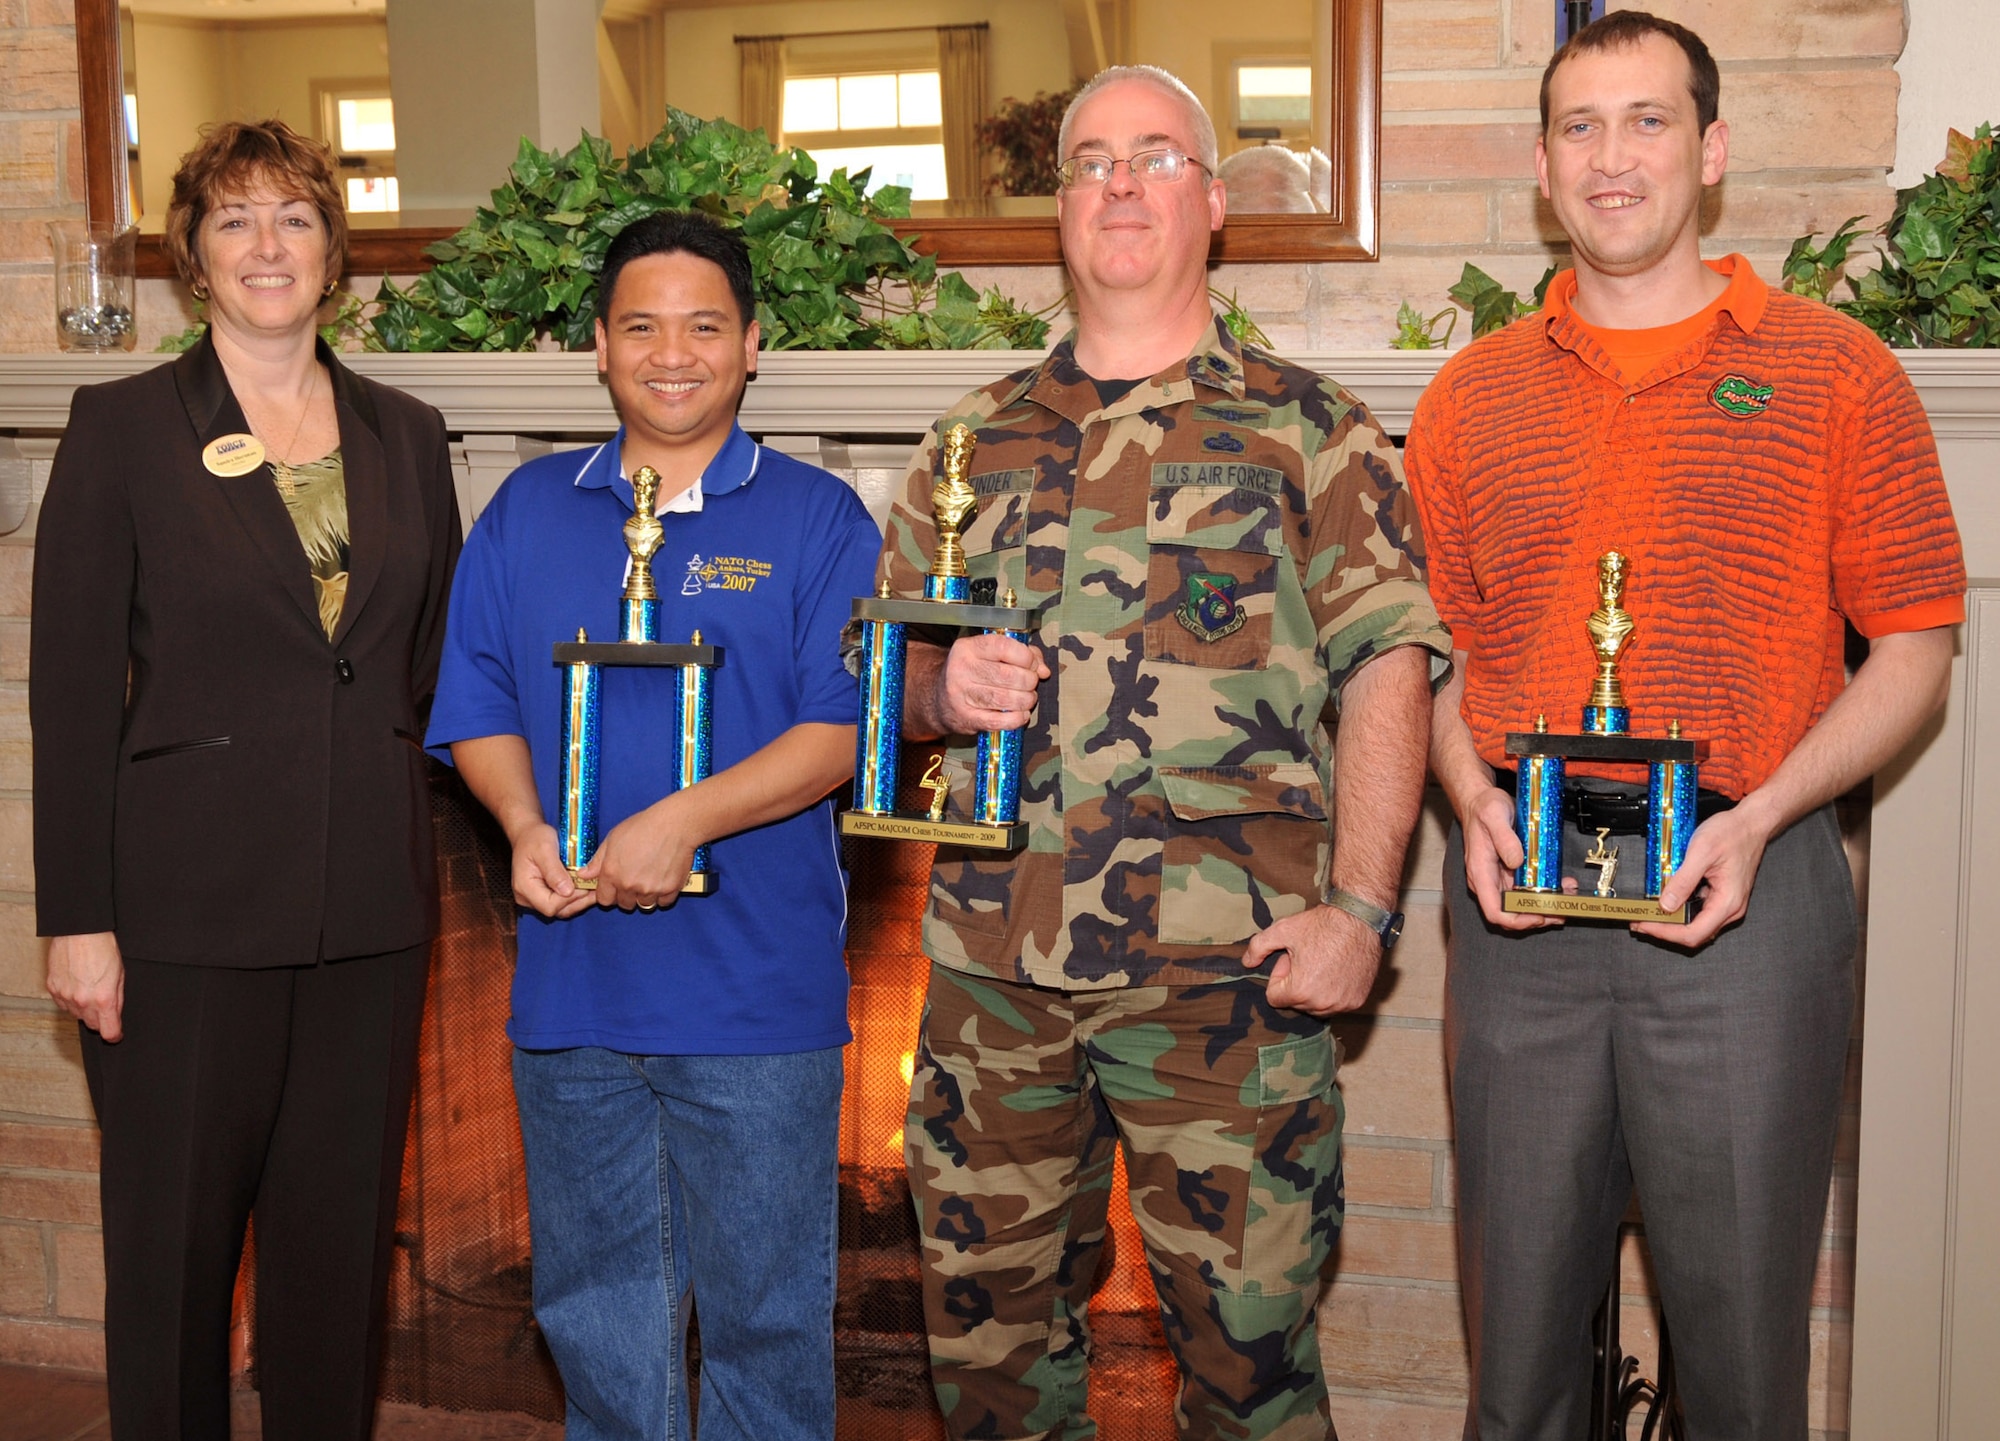 SMC’s Lt. Col. Douglas Taffinder placed second at the Air Force Space Command’s MAJCOM-Level chess tournament held here, March 13.  Tech. Sgt. Nathaniel Ola from Vandenberg AFB took the top prize and Maj. Robert Jertberg also from Vandenberg placed third.  Sandra Horsman, chief of LAAFB Services, awarded the trophies to the top finishers. (Photo by Lou Hernandez)